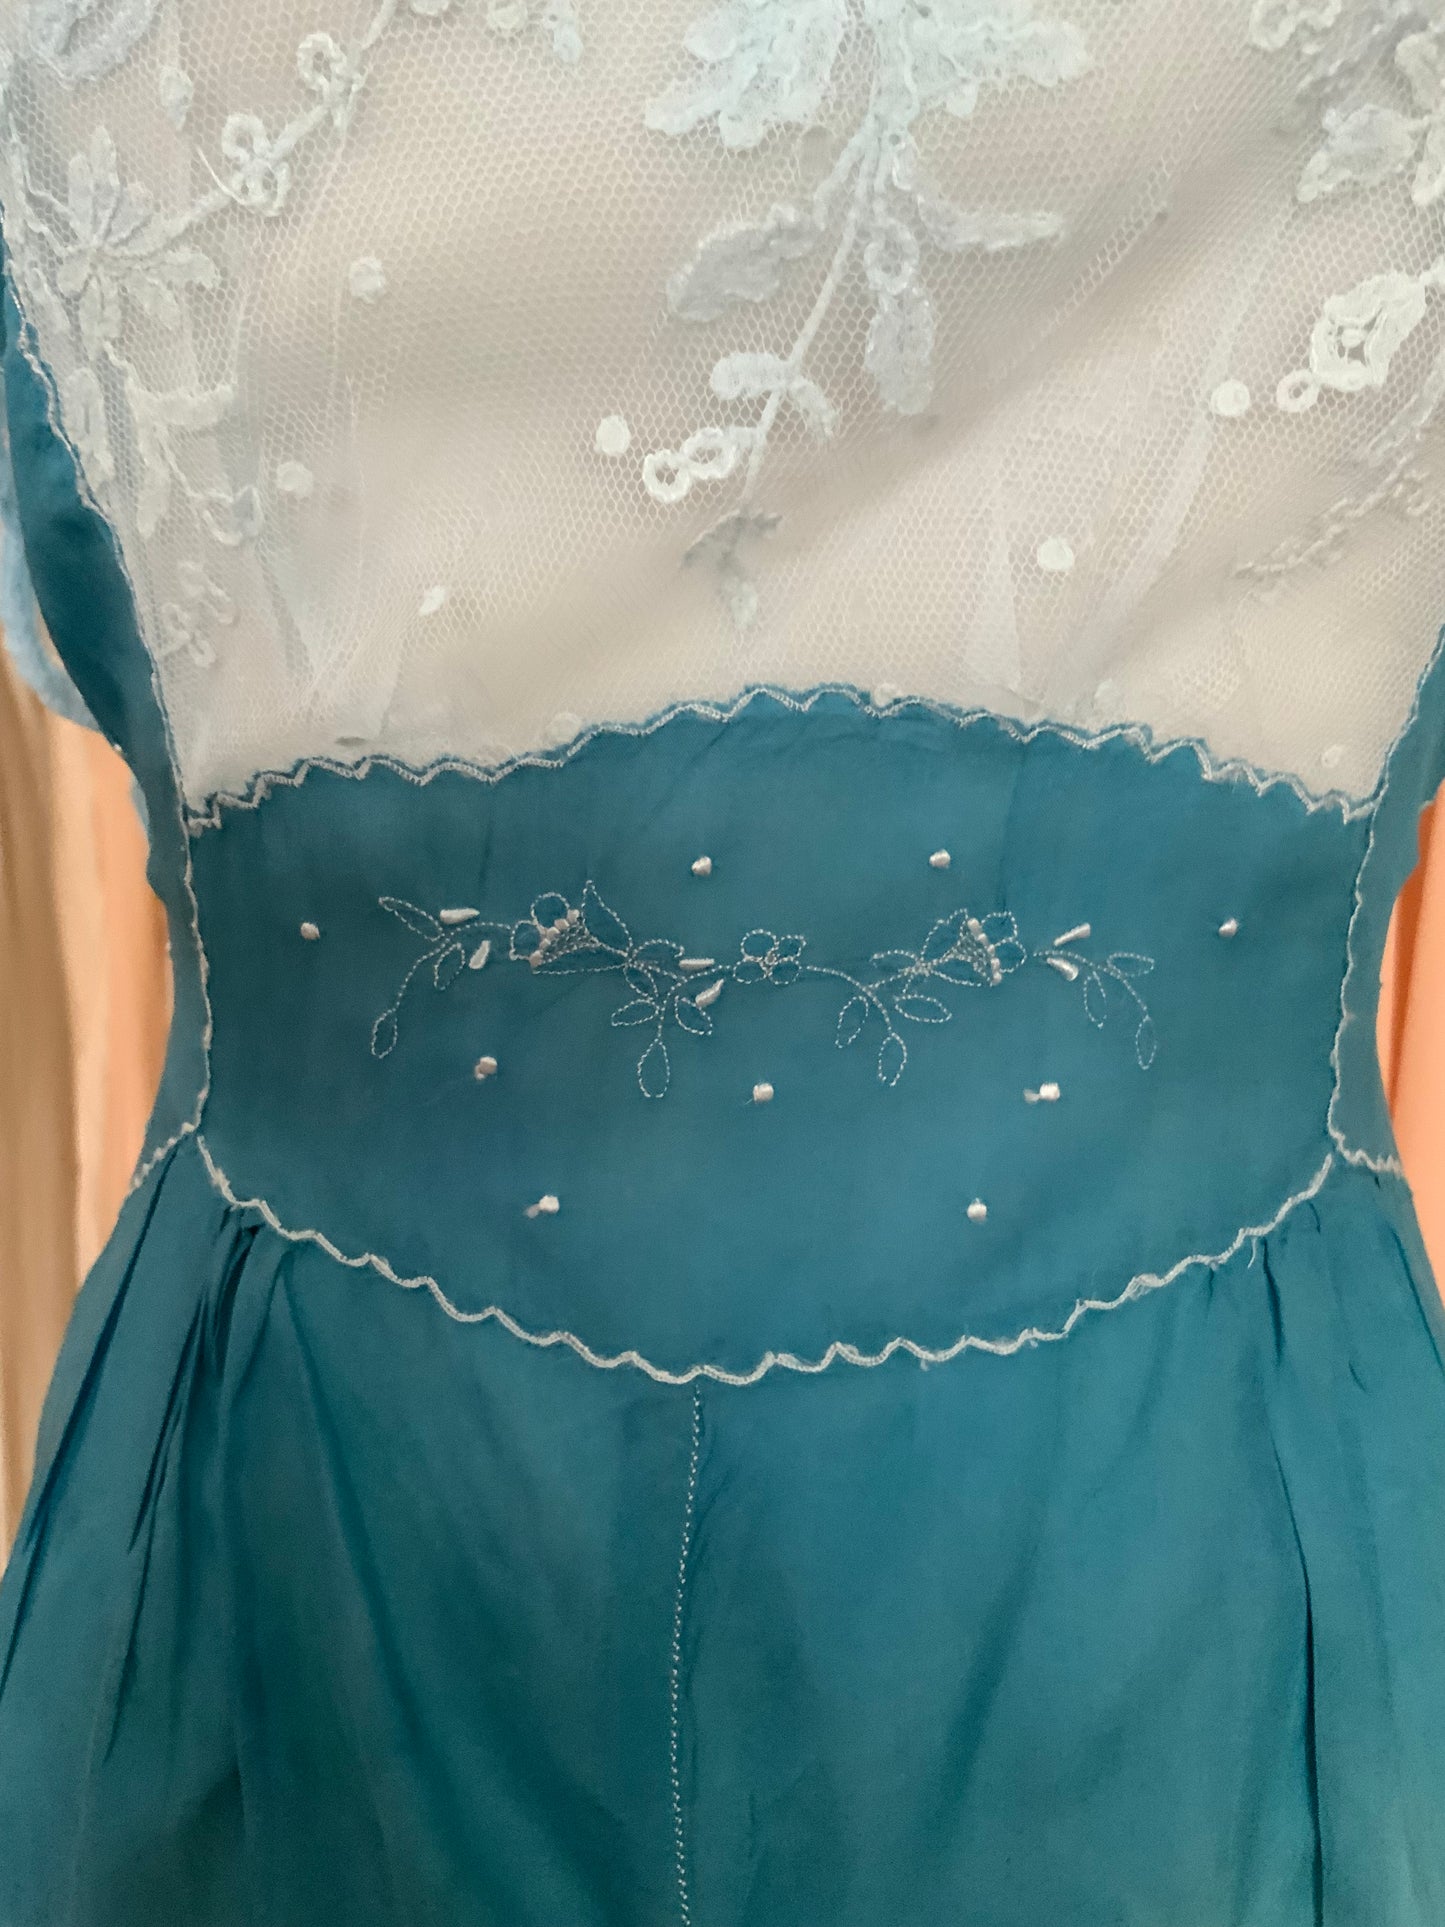 Hand Dyed Turquoise Bridal Nightgown - 50s